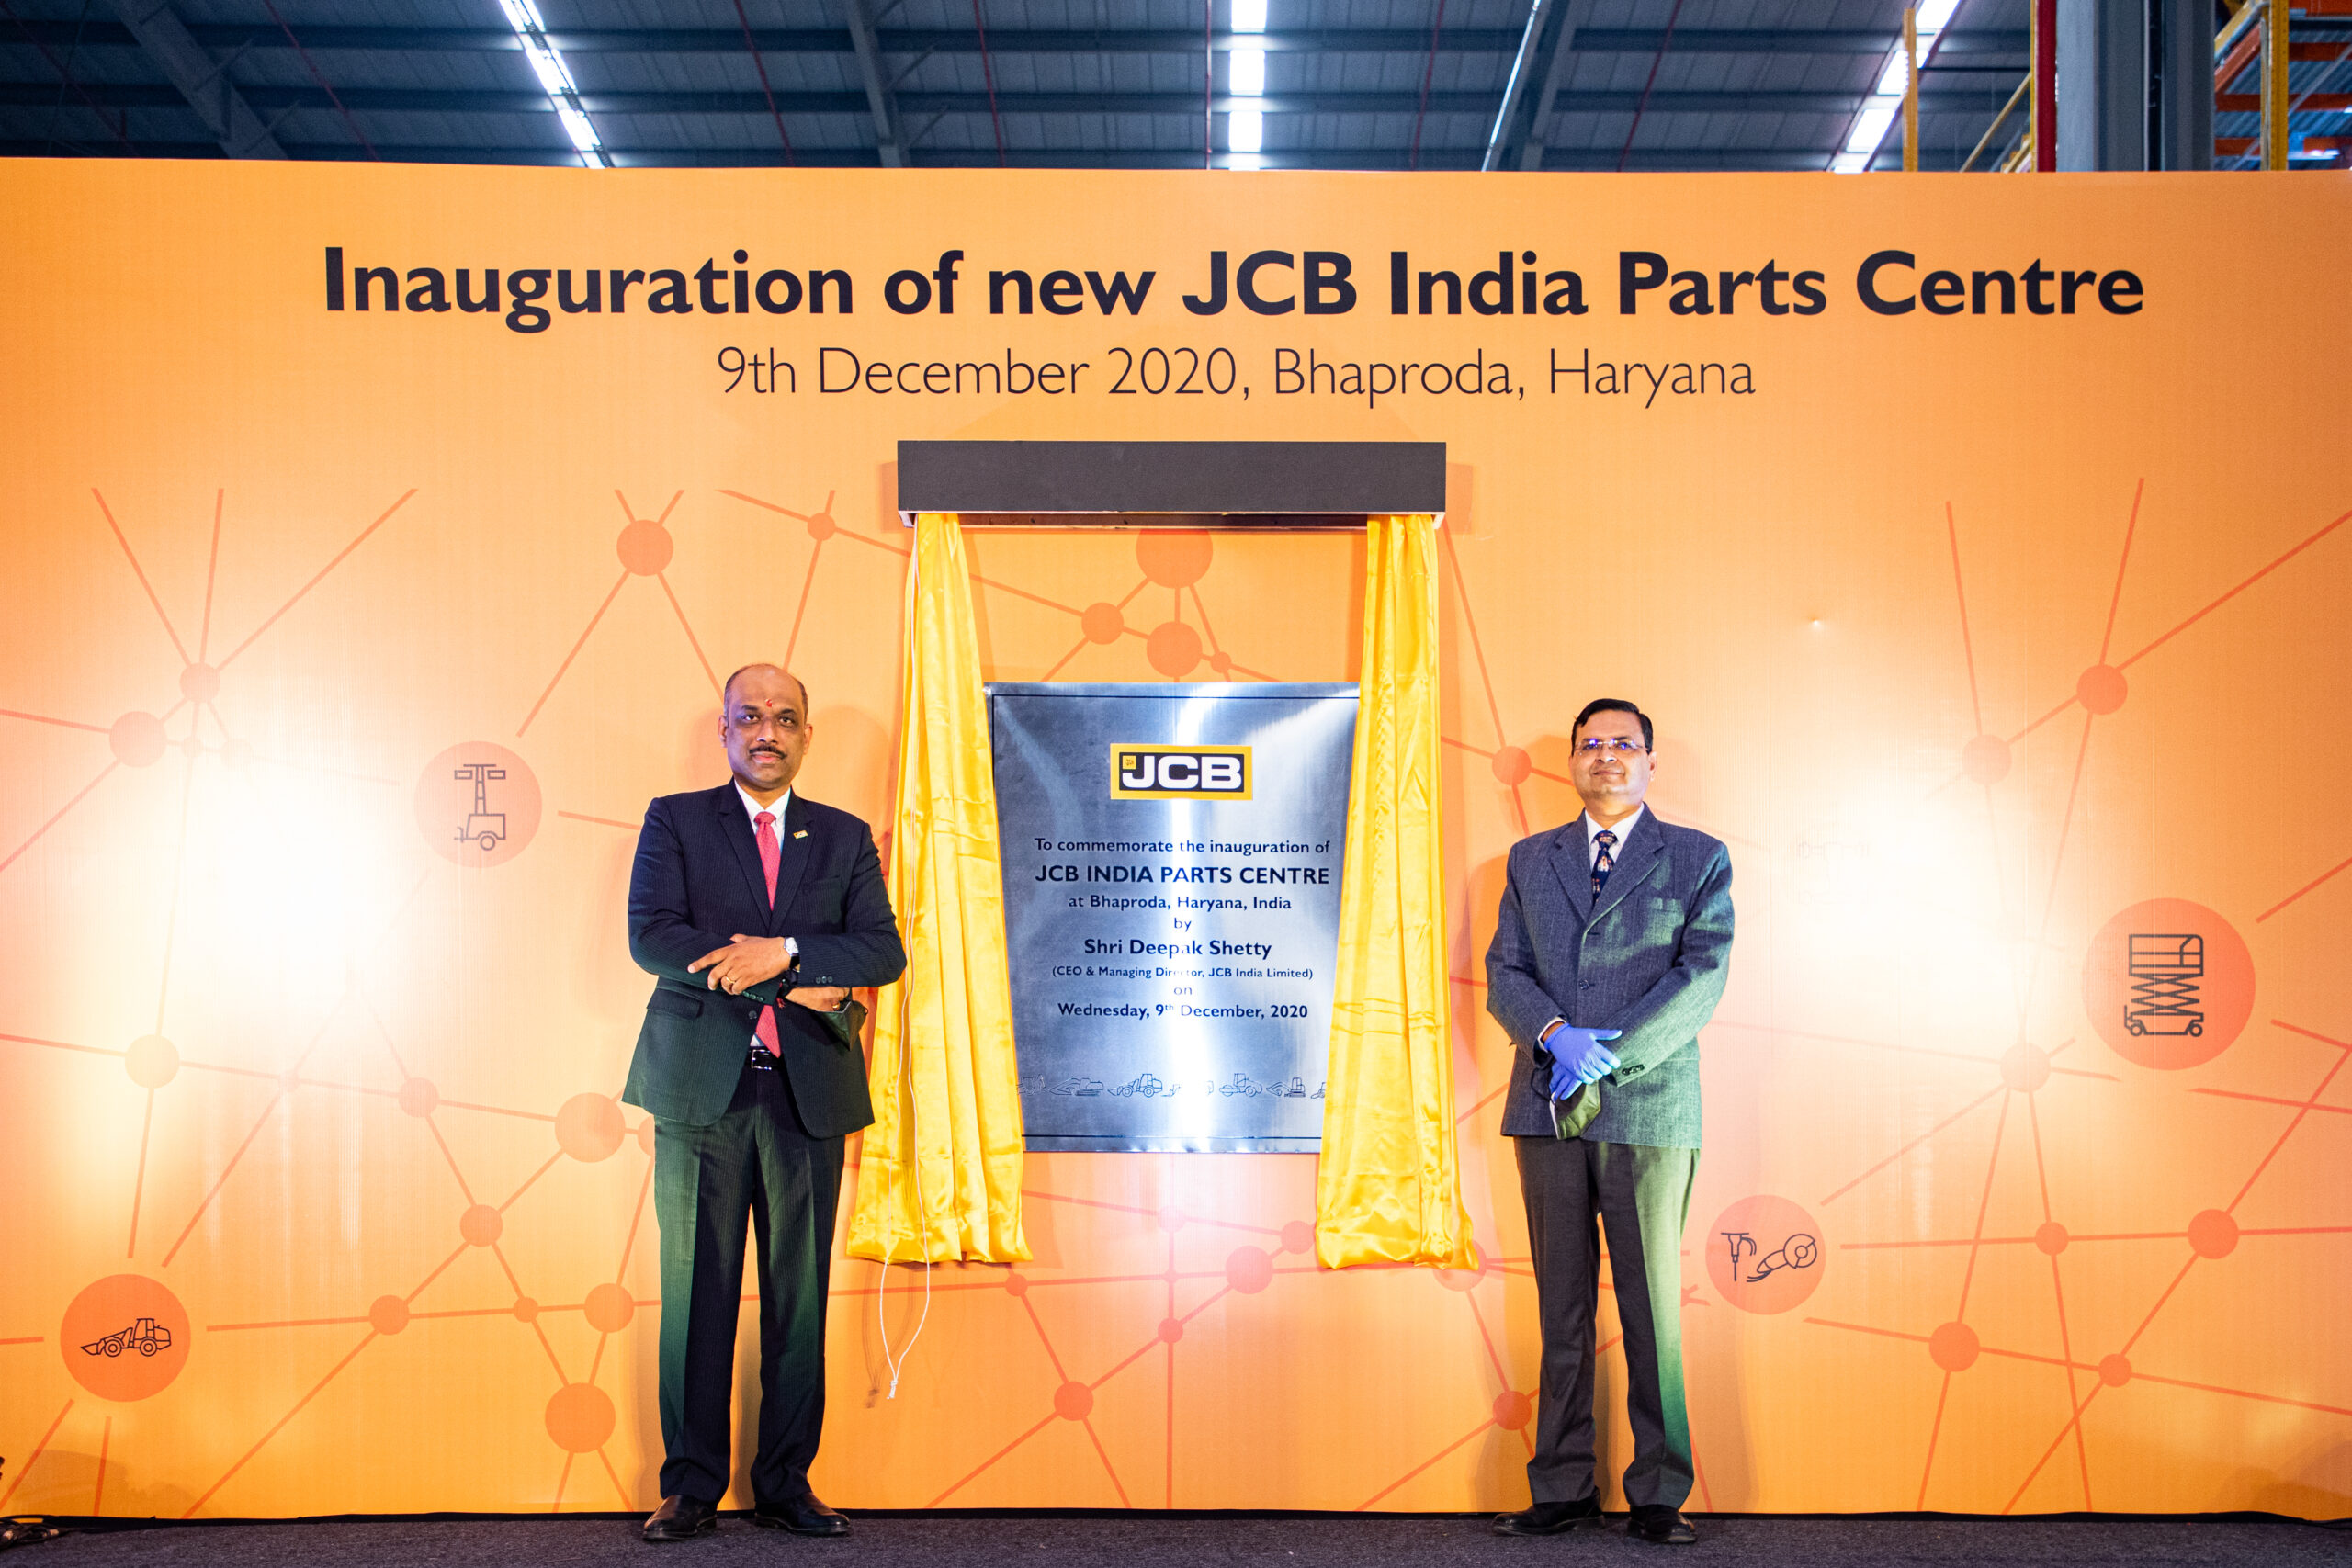 JCB India largest Parts Centre Inaugurated